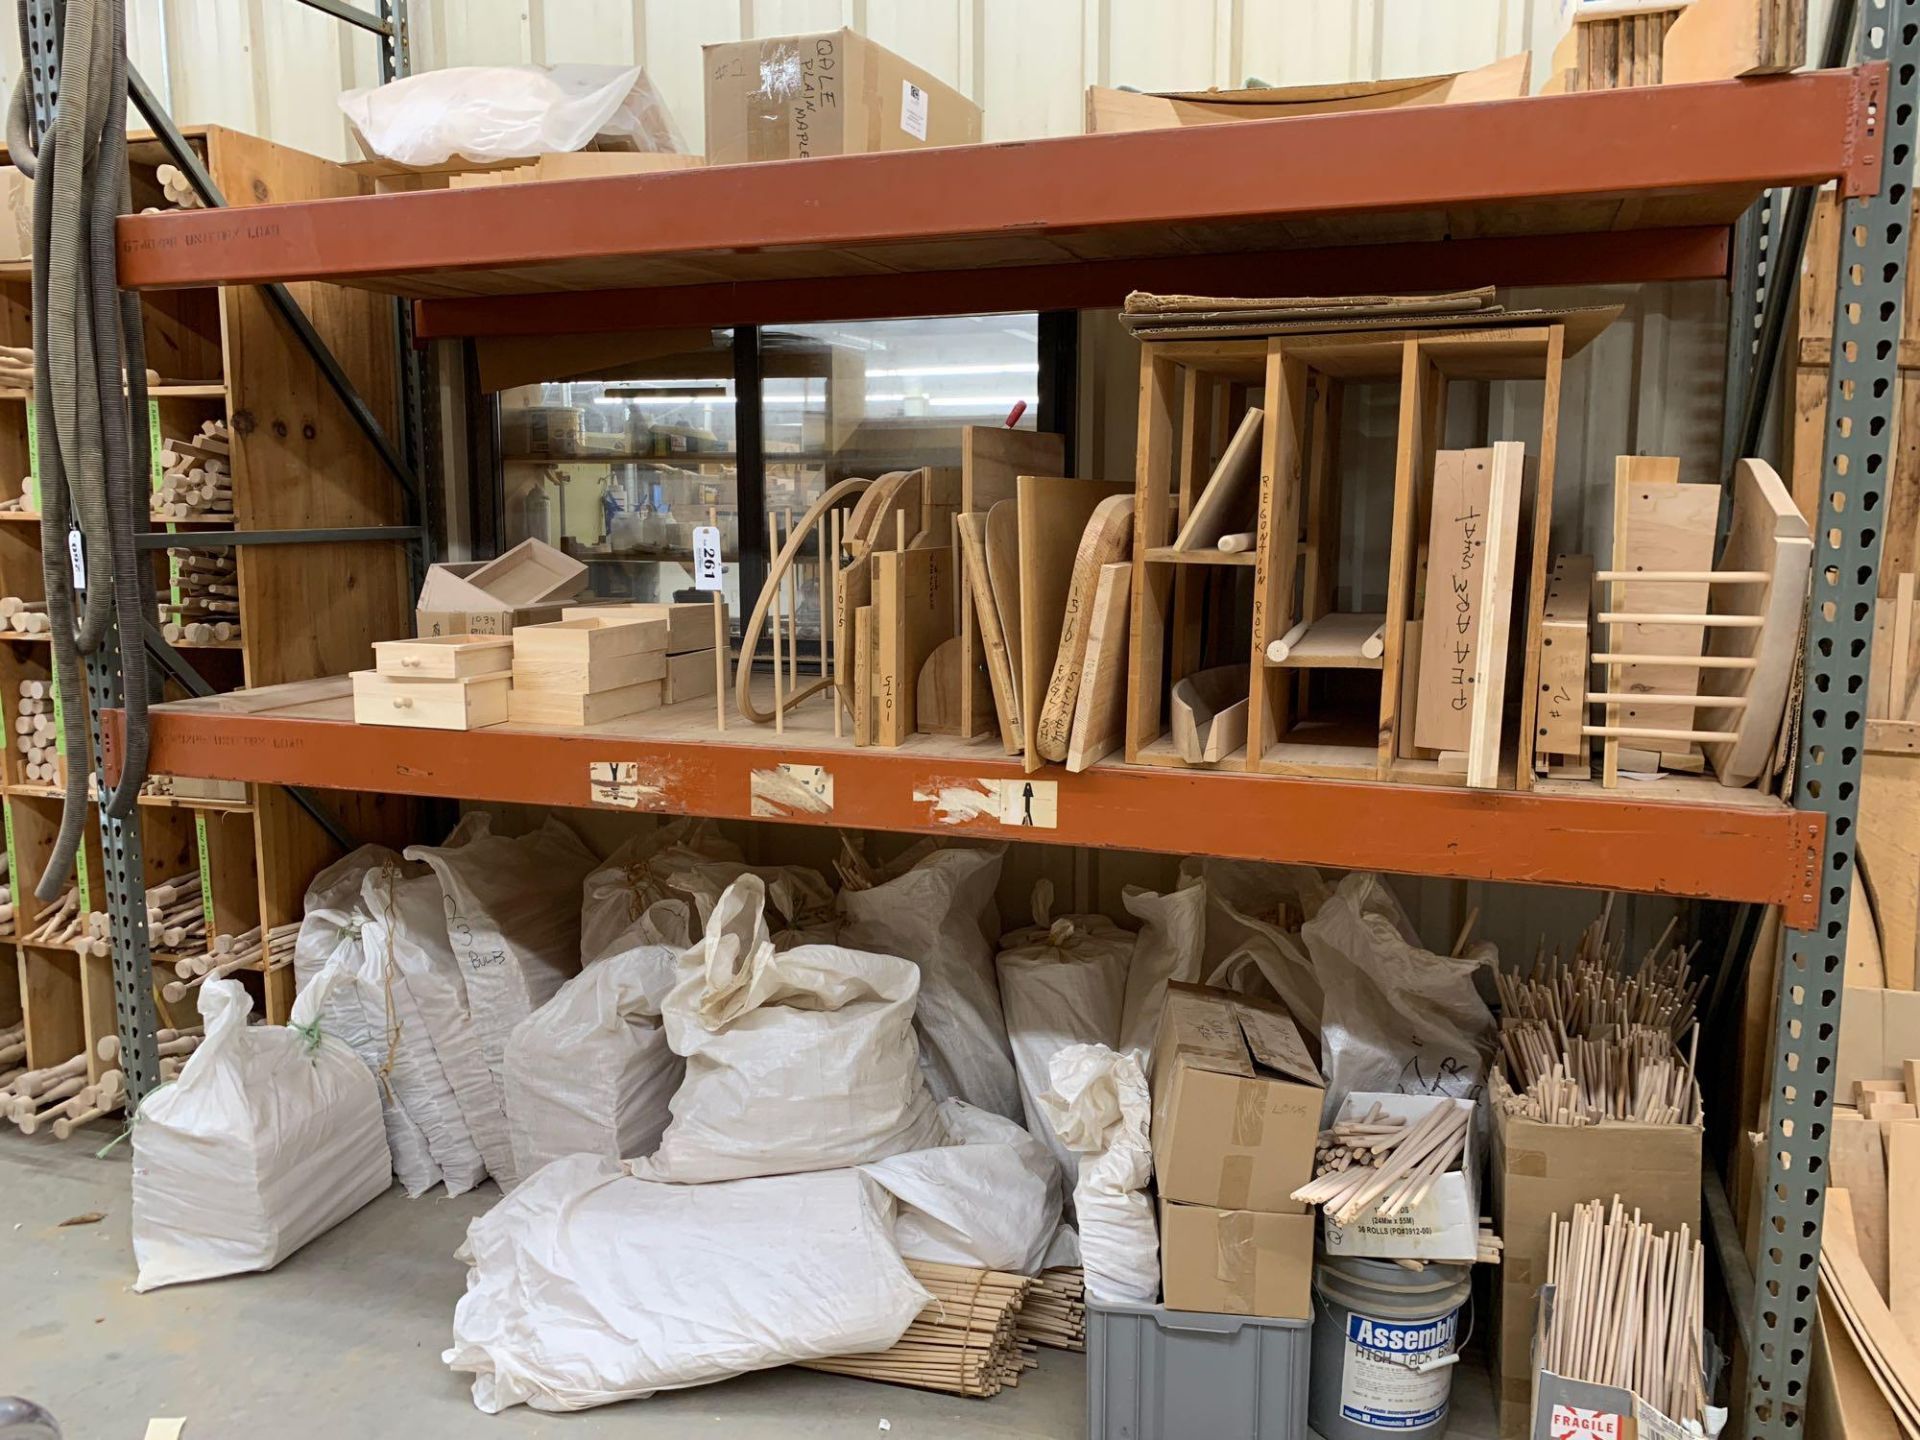 Lot of bagged spindles, dowels and contents of 2 shelves above